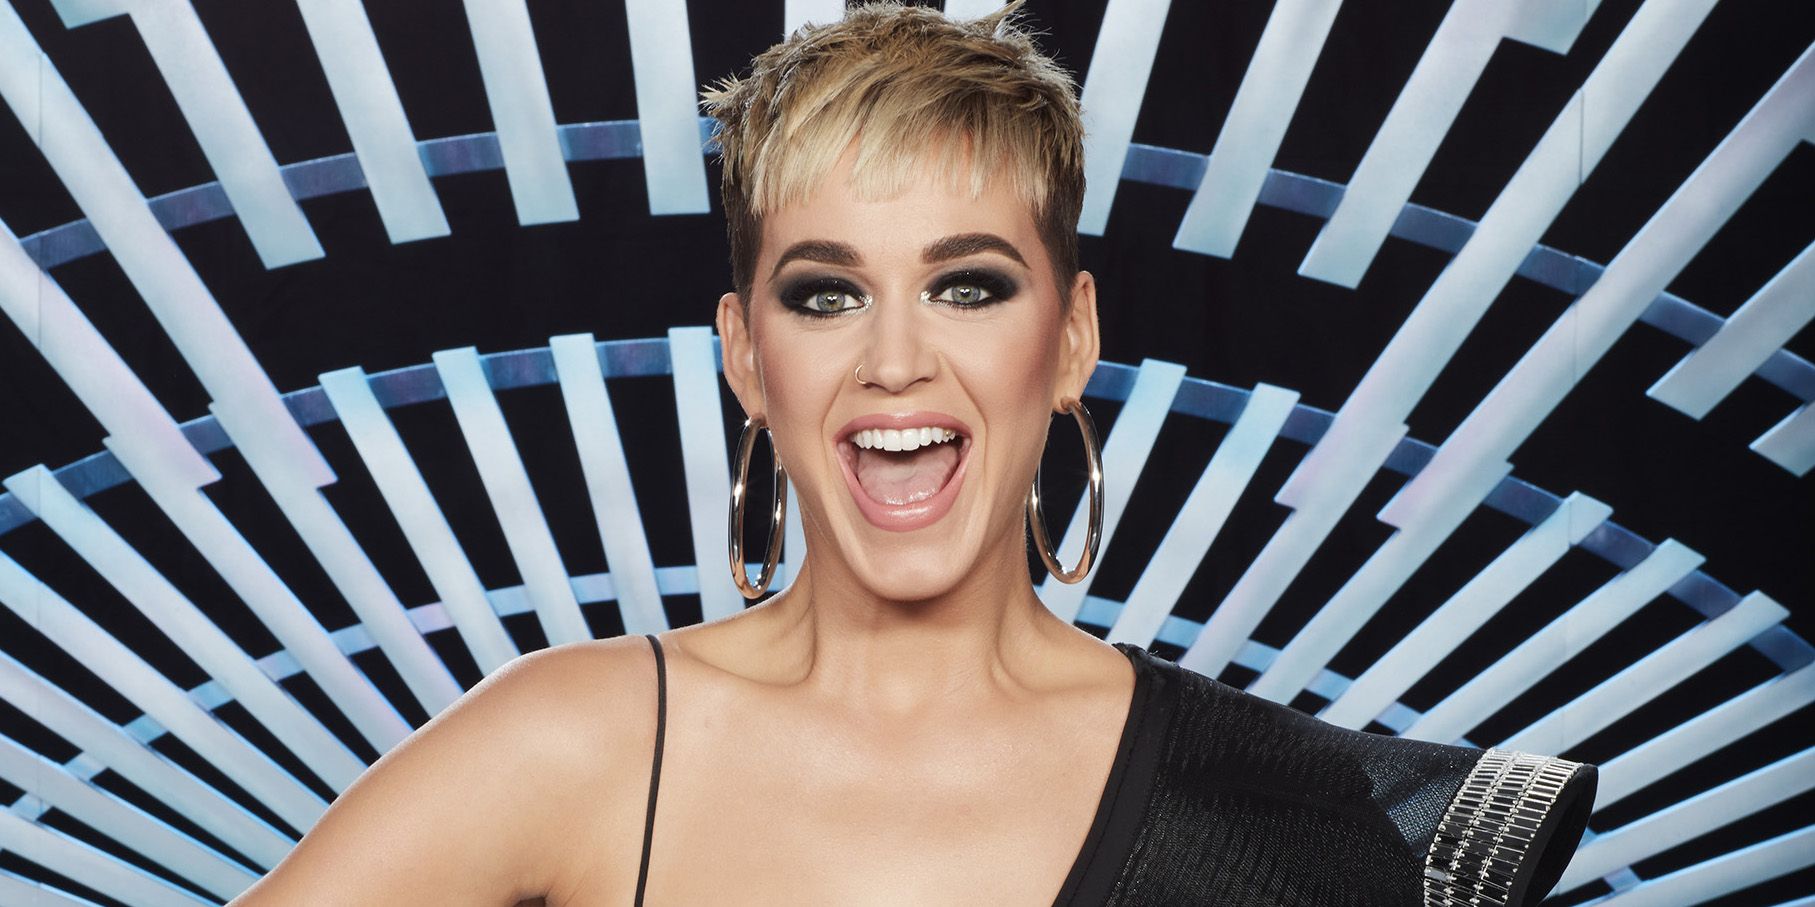 Anal Fucking Katy Perry - Katy Perry Roasted By Her Parents on 'American Idol' - Katy Perry's Mom and  Dad Insult Singer on Air